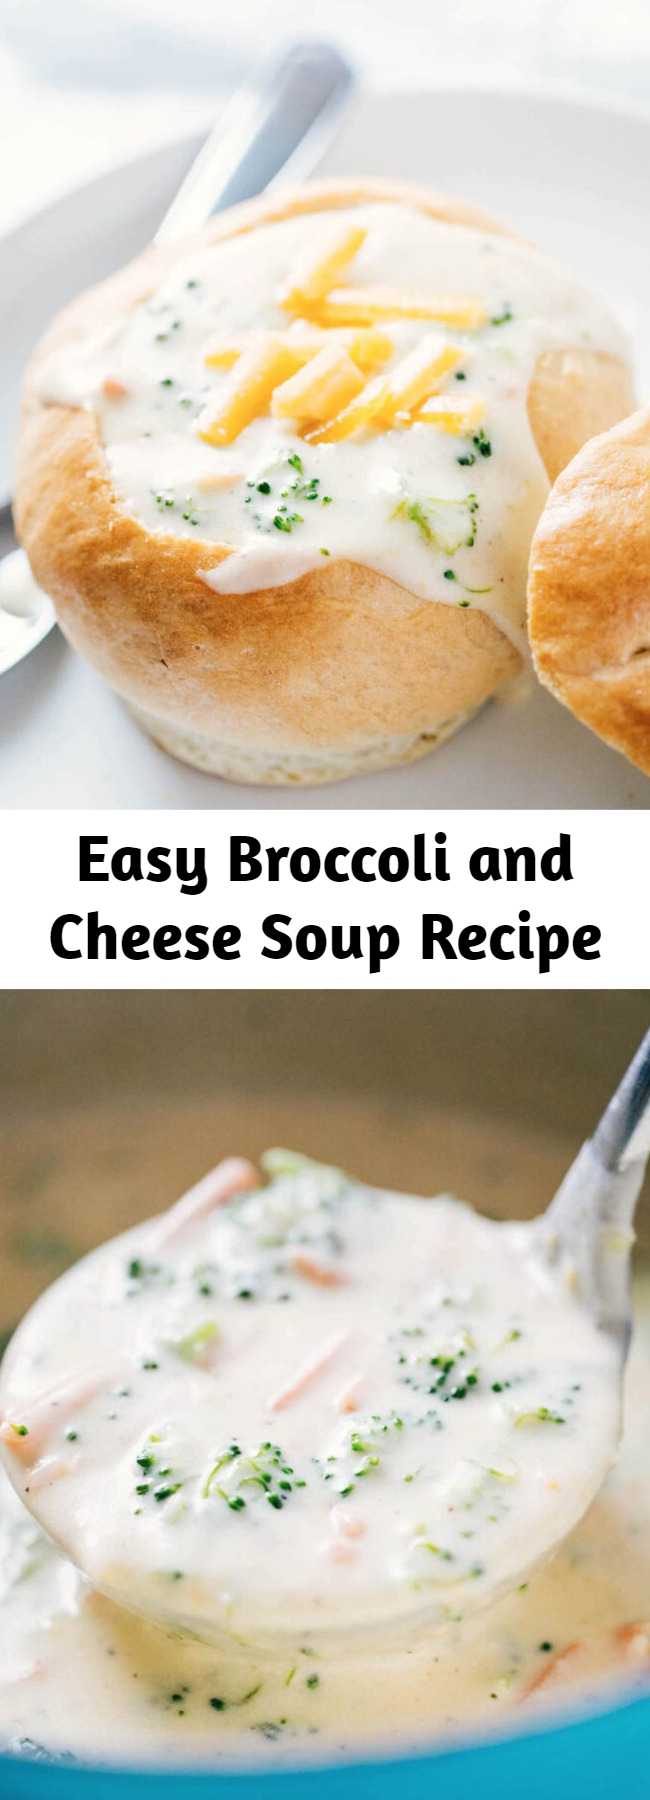 Easy Broccoli and Cheese Soup Recipe - Creamy, delicious and ready to go in 30 minutes! Tastes just like the Panera broccoli cheddar soup and is so easy to make! Serve in a homemade bread bowl to take this broccoli cheese soup recipe over the top! #broccoli #cheese #soup #souprecipes #easyrecipe #homemade #fall #fallrecipes #winter #winterrecipes #cheesy #recipes